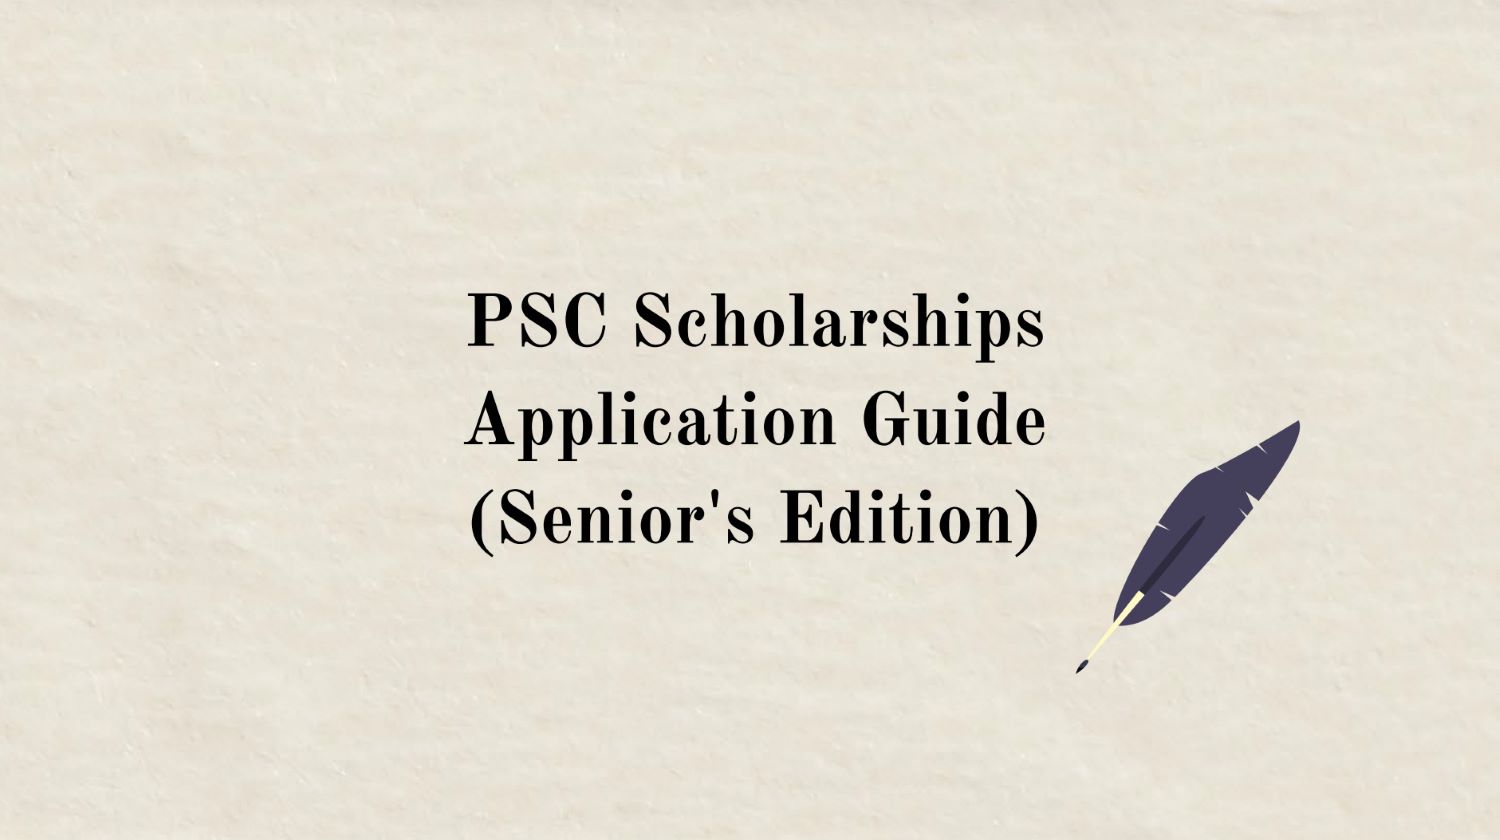 PSC Scholarship Application Guide